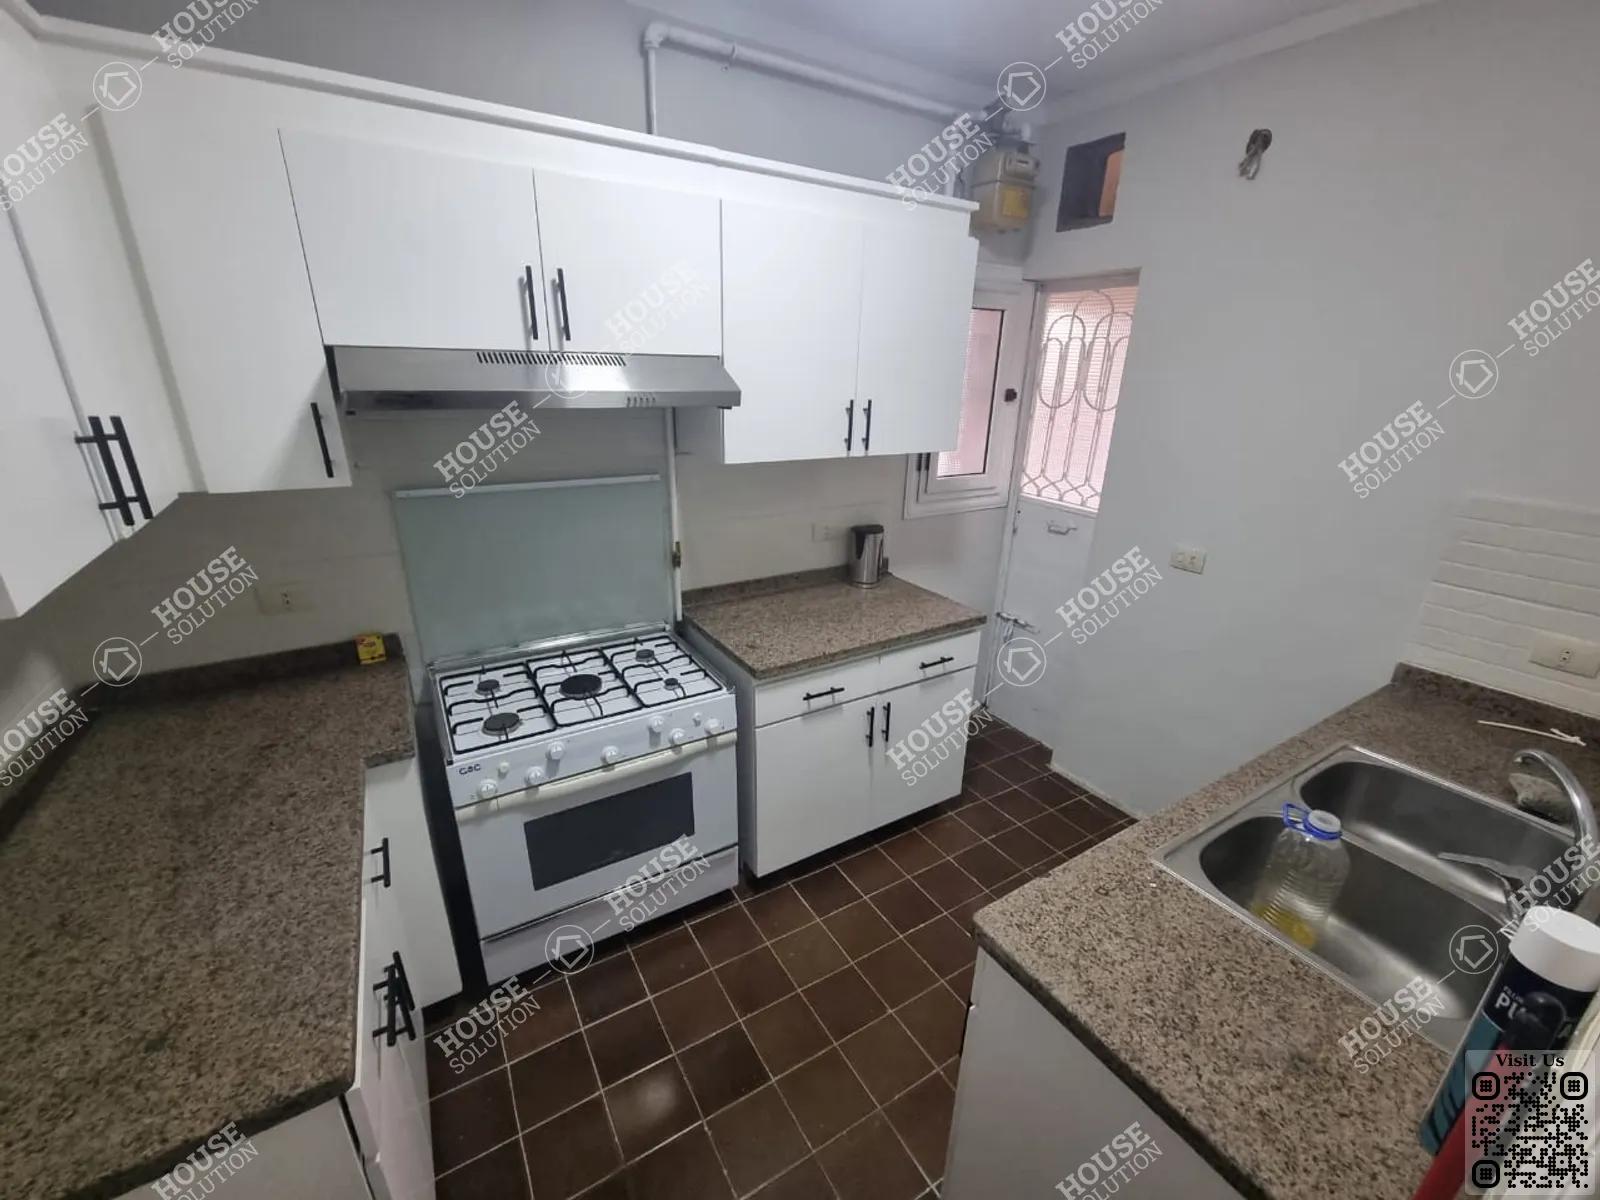 KITCHEN  @ Apartments For Rent In Maadi Maadi Degla Area: 140 m² consists of 3 Bedrooms 2 Bathrooms Modern furnished 5 stars #5292-2